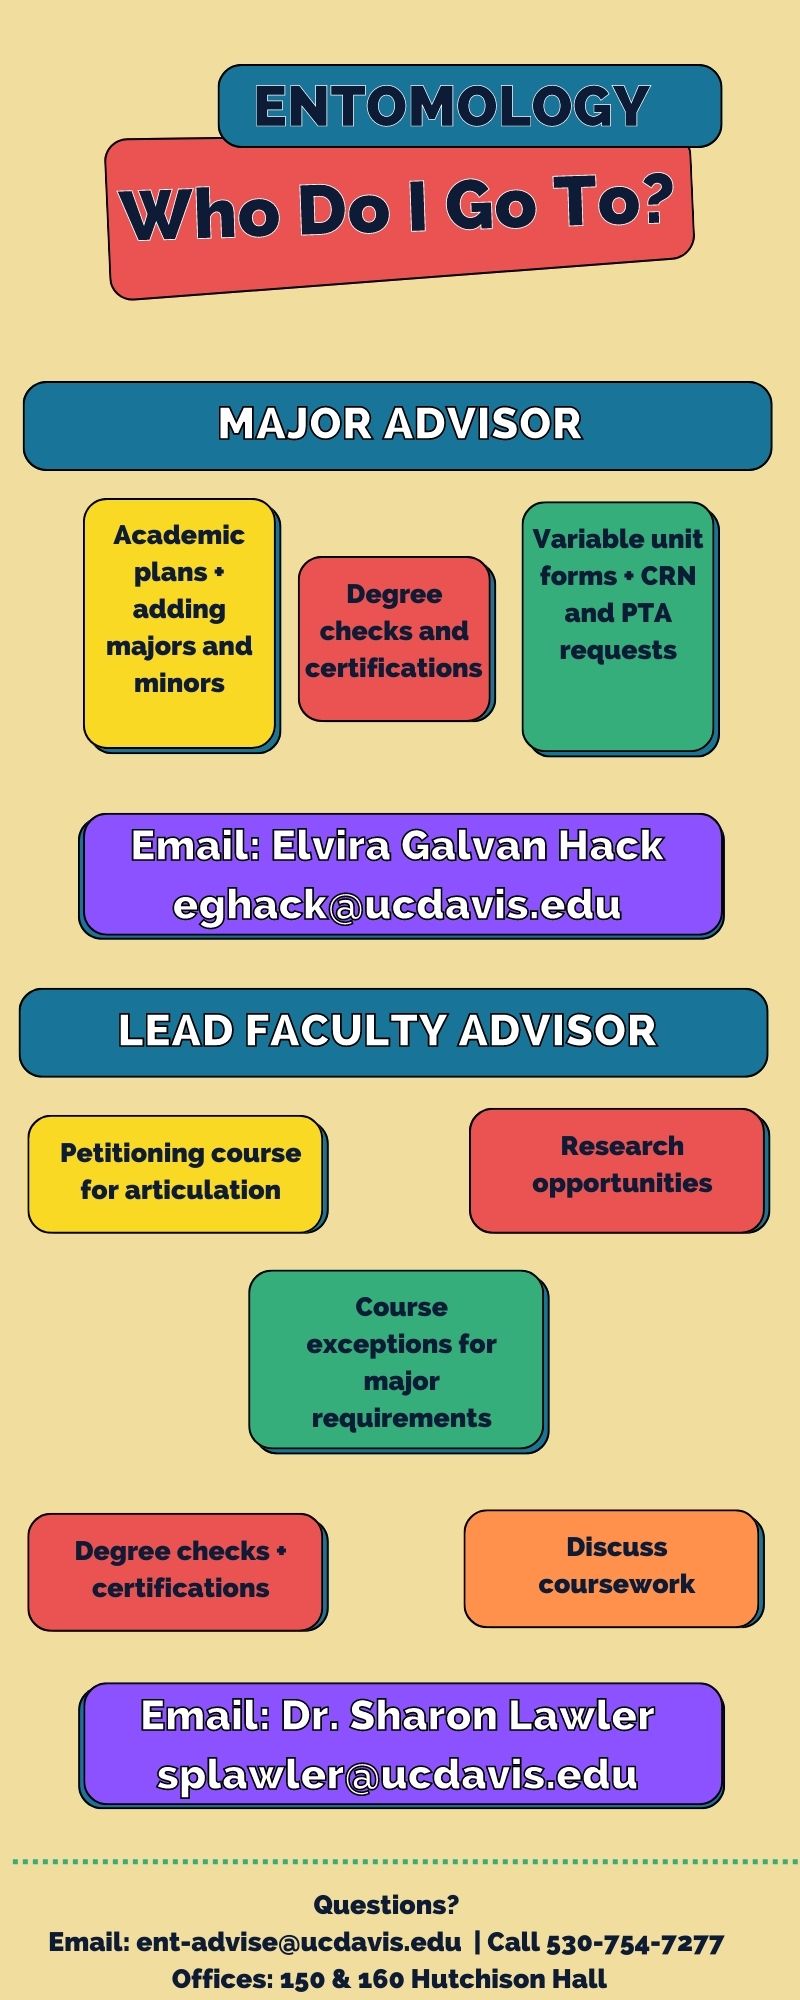 Graphic: Who do I go to? General Questions: ent-advise@ucdavis.edu or call 530-754-7277, Contact Major Advisor Elvira Hack for Academic Plans, Adding Majors or Minors, Degree Checks and Certifications, Variable Unit Forms, CRN and PTA Requests or Contact Lead Faculty Advisor Dr Sharon Lawler for Petitioning course for articulation, Research Opportunities, Course Exceptions for Major Requirements, Degree Checks and Certifications, Discuss Coursework, additional contact information to right